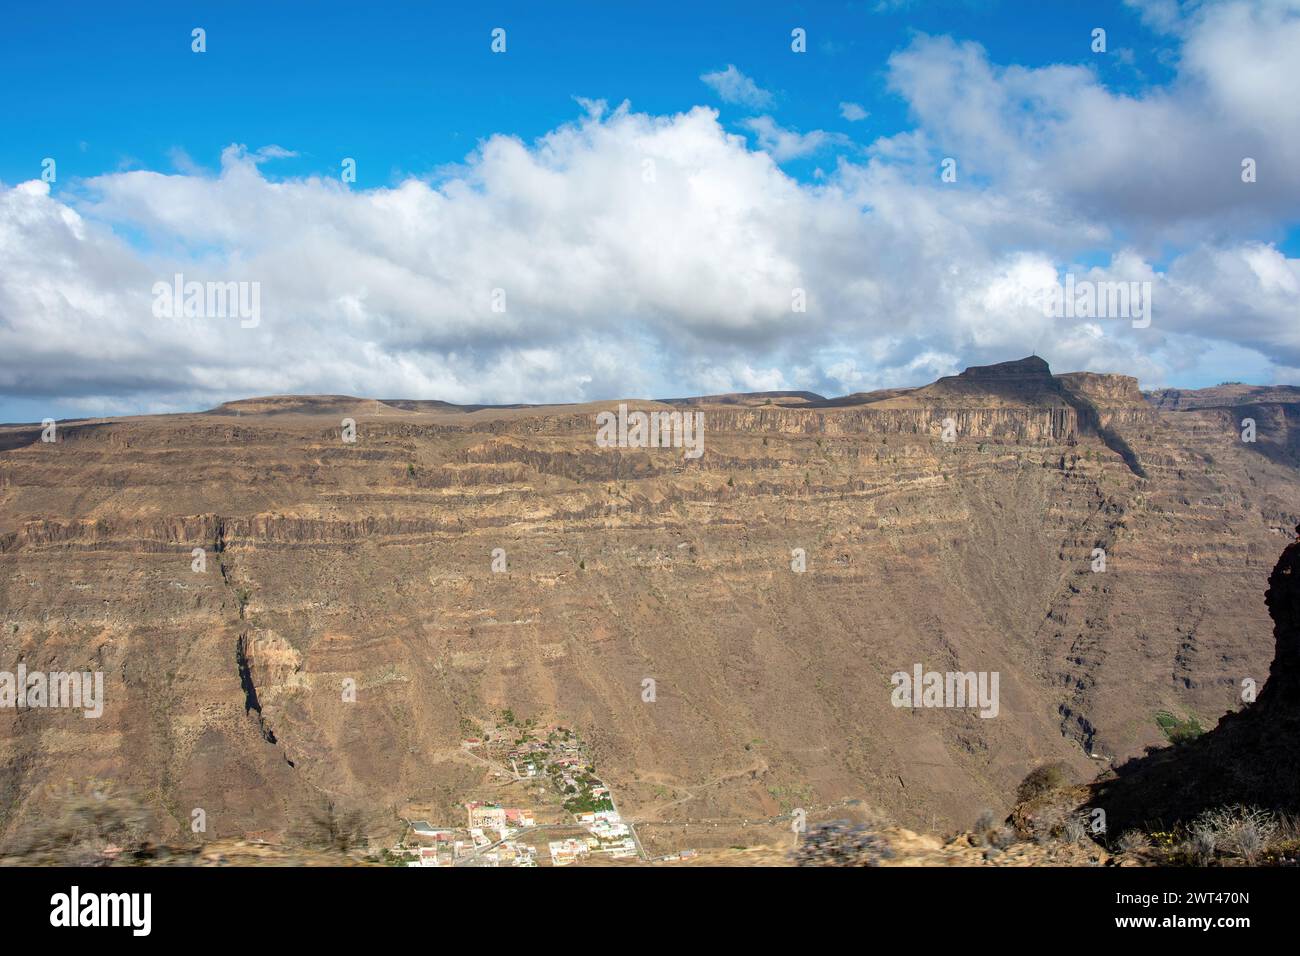 Mountains with a small village in the valley on the Canary Island of Gran Canaria in Spain, with blue sky and clouds Stock Photo